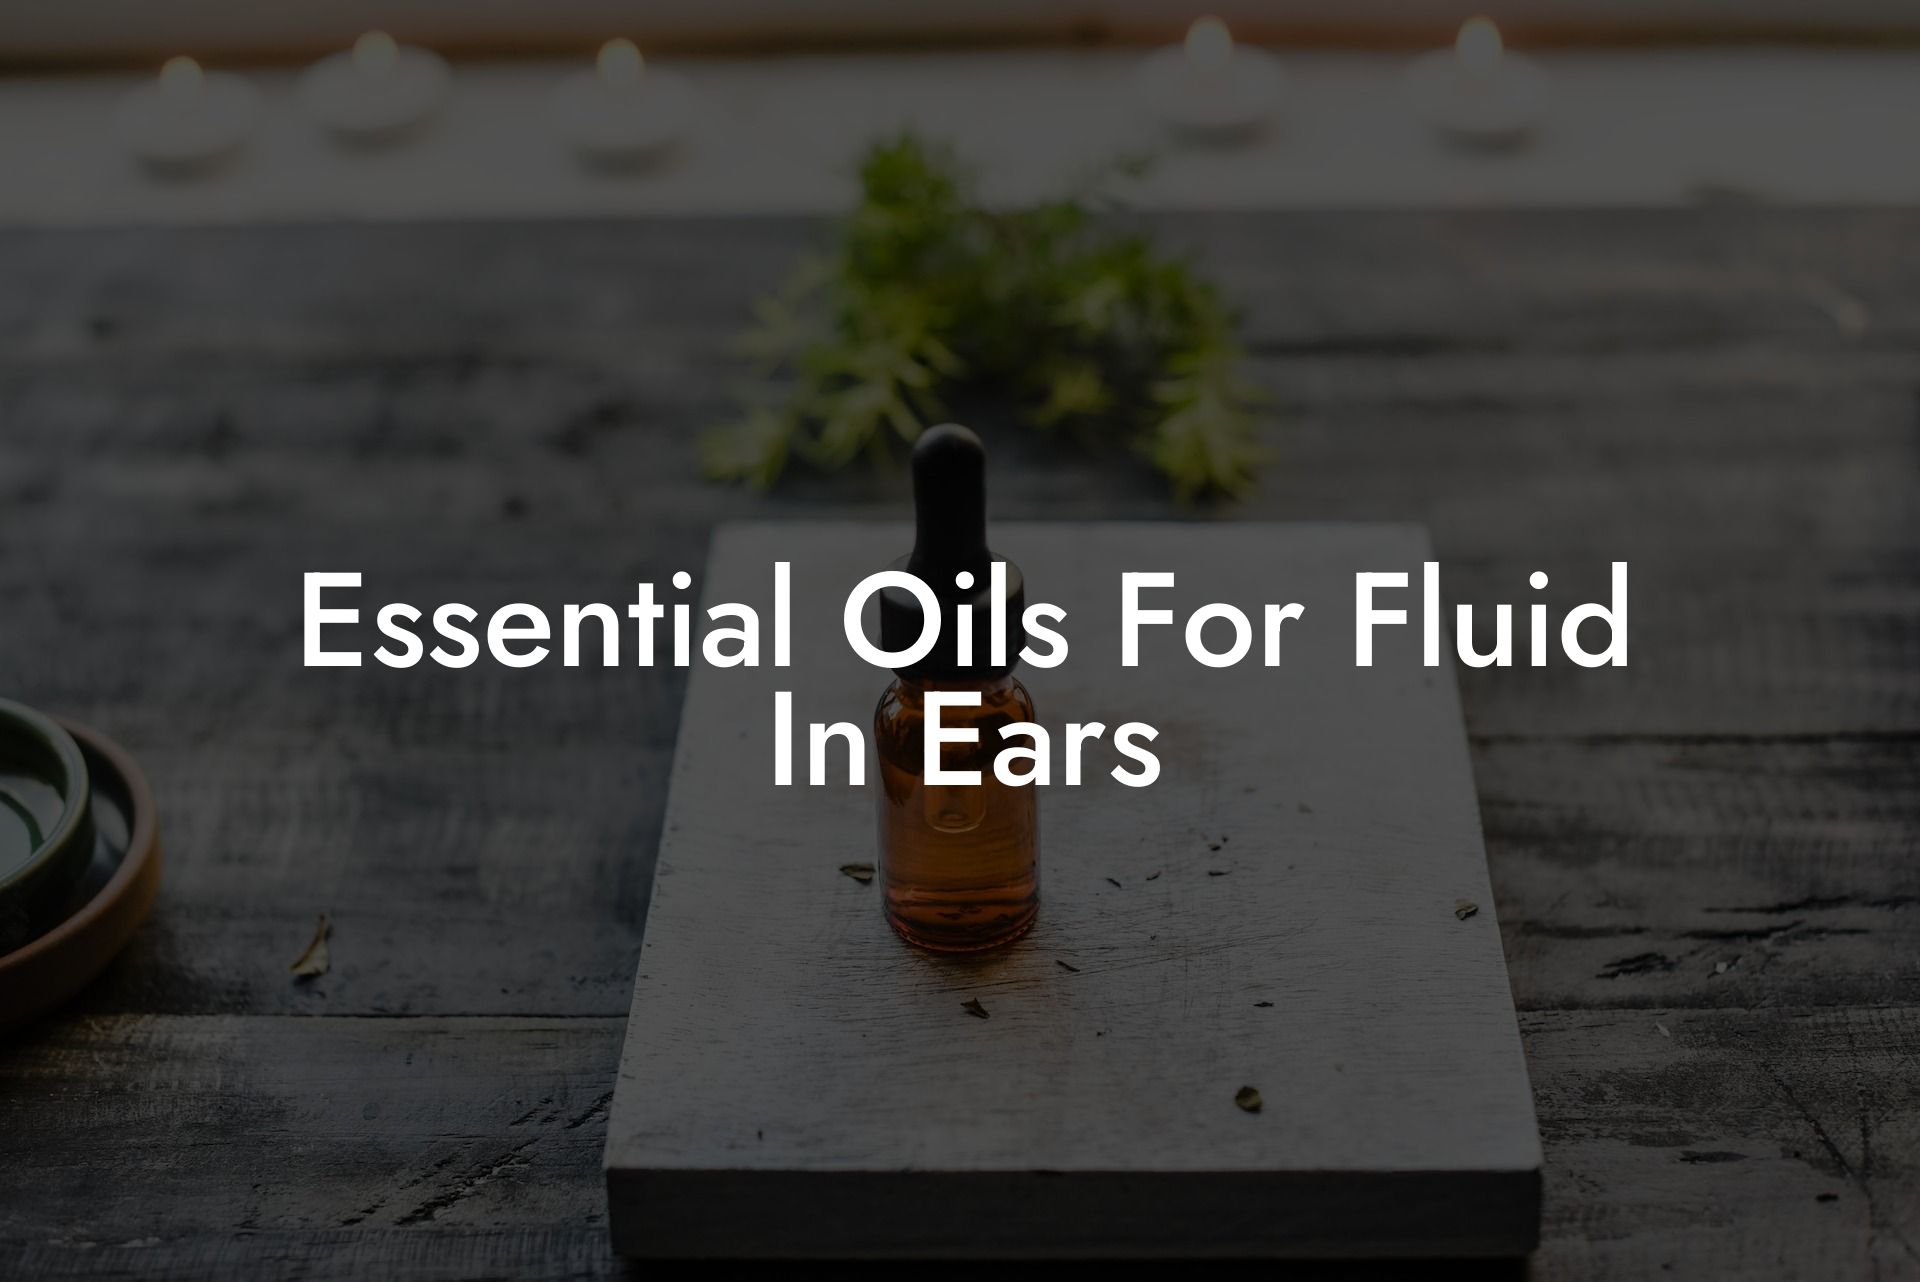 Essential Oils For Fluid In Ears